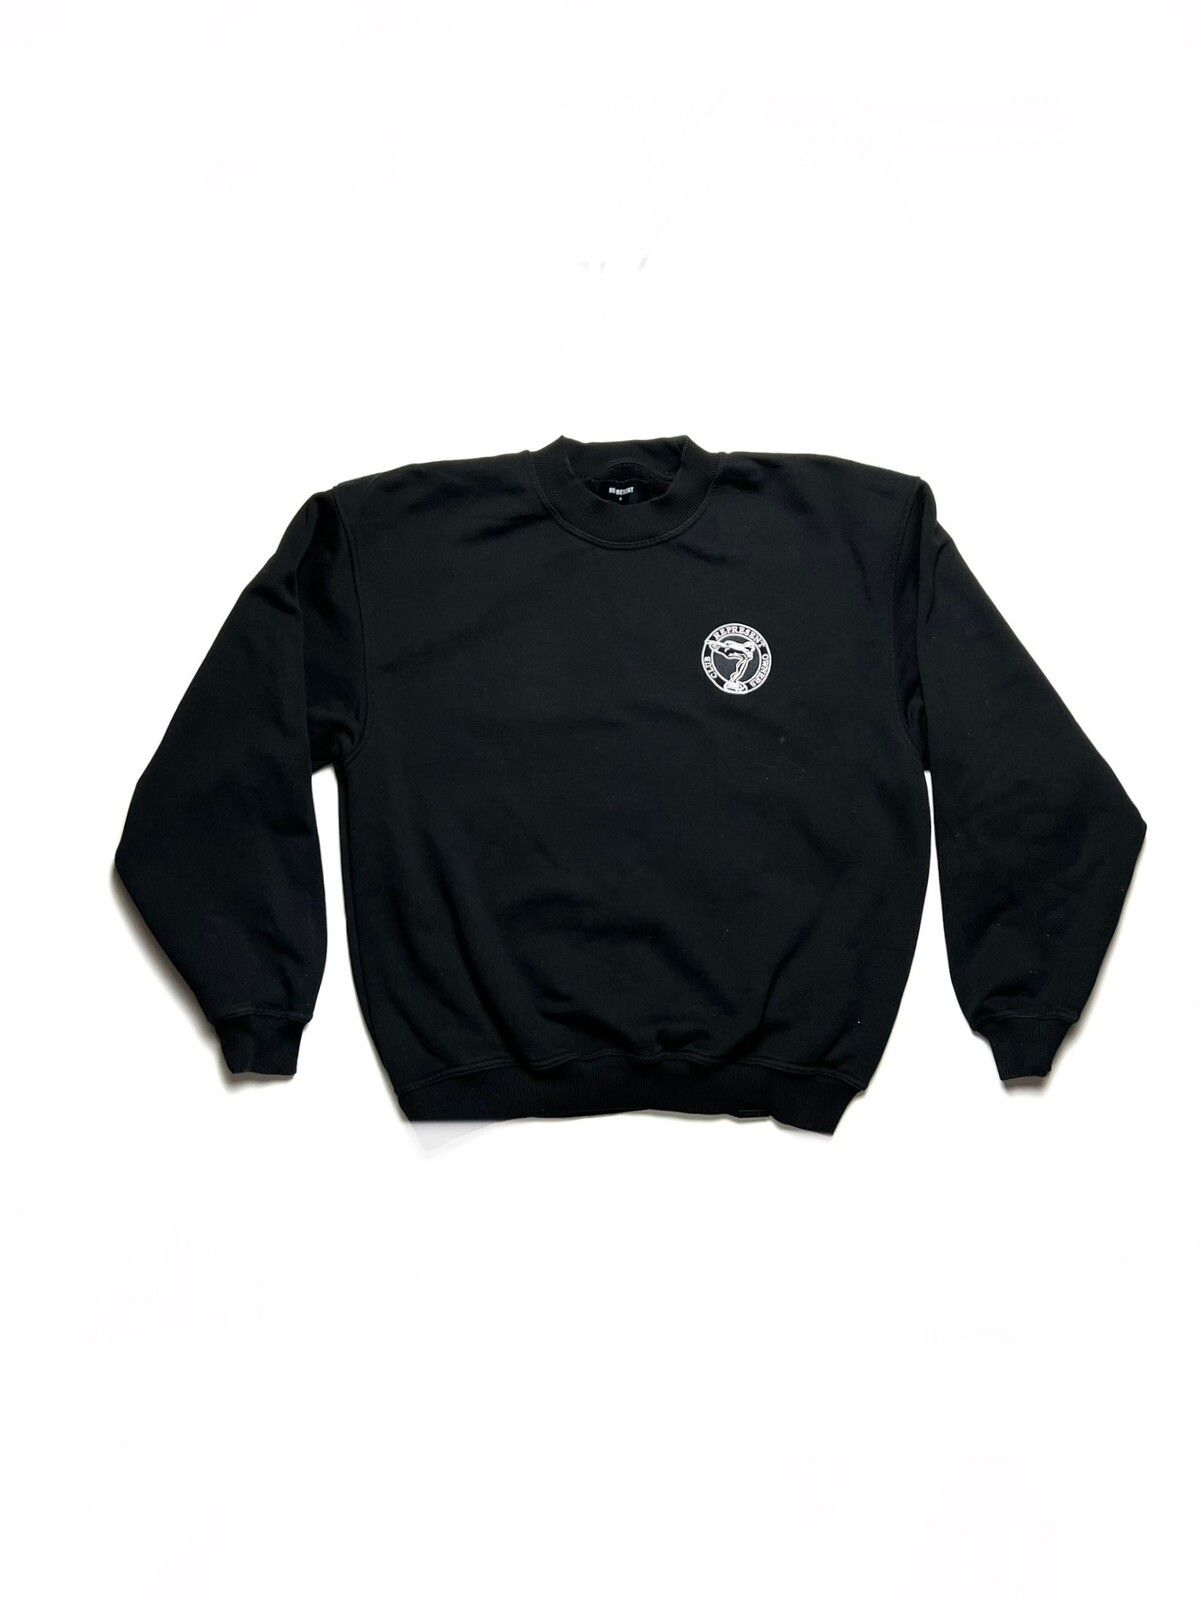 Pre-owned Represent Clo Represent Owners Club Small Logo Oversized Crewneck In Black